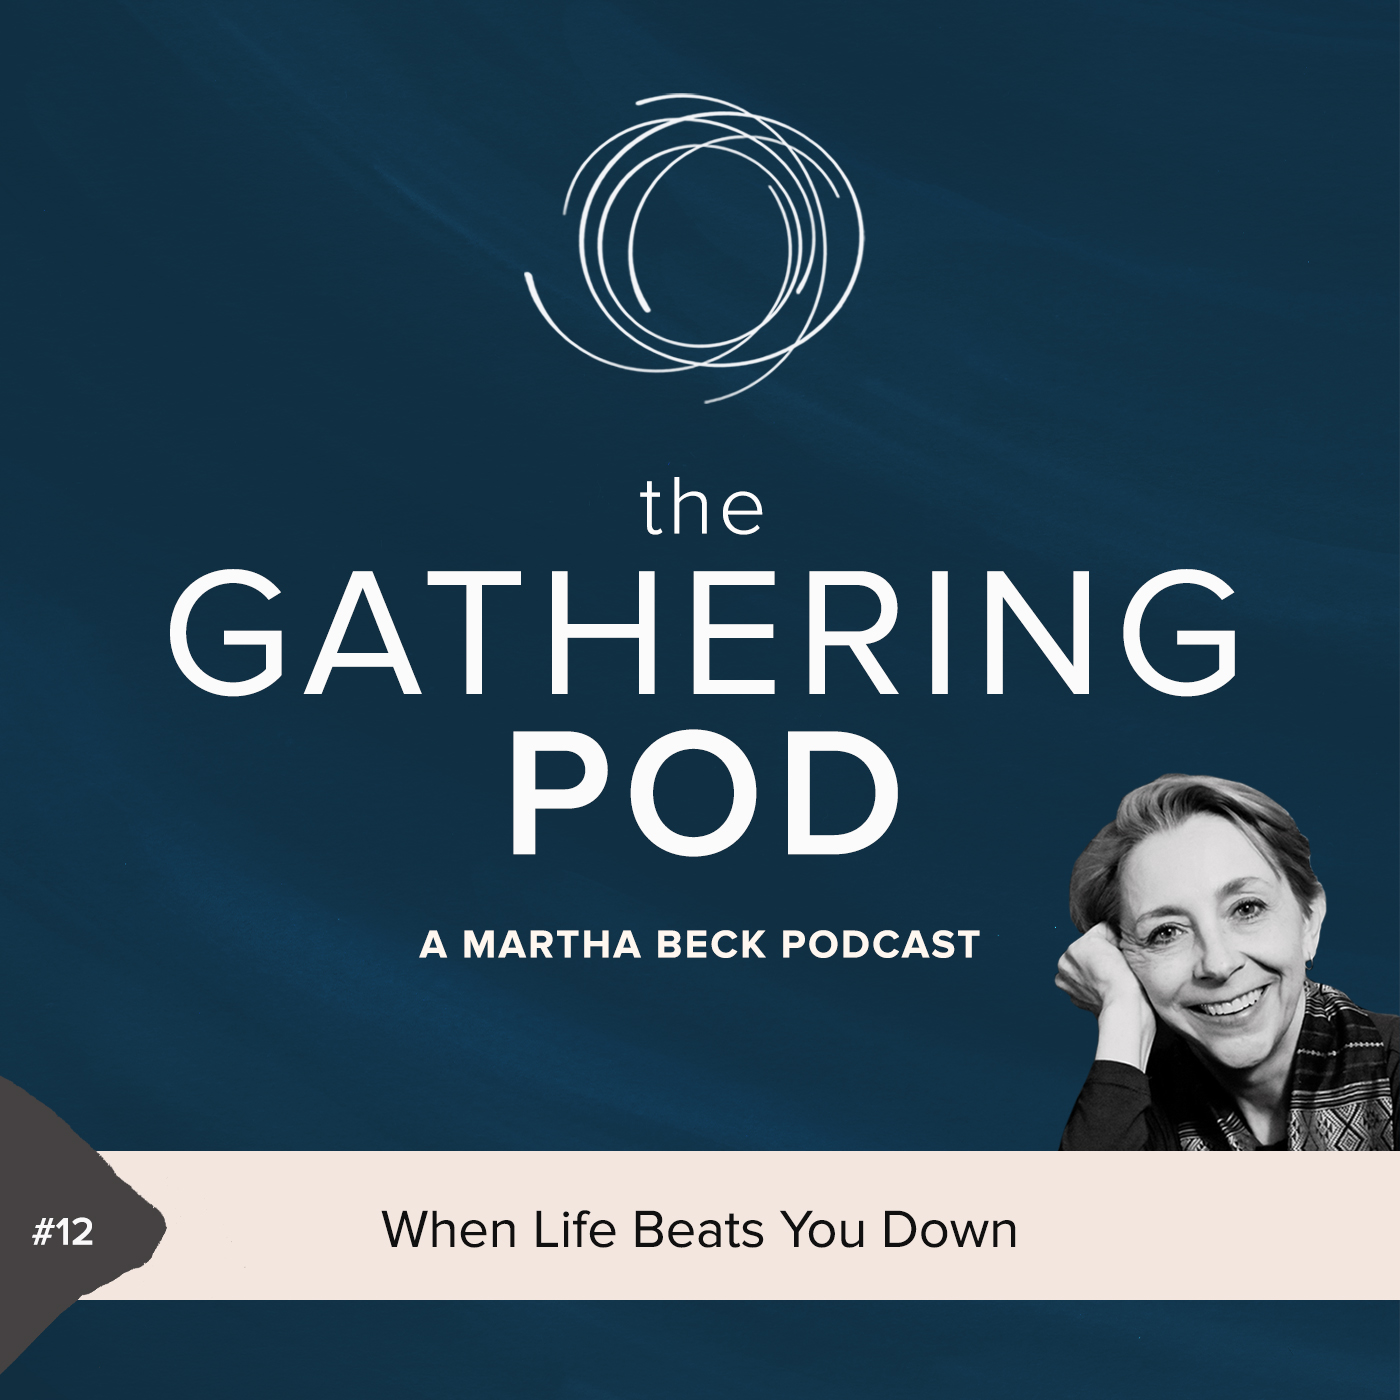 Image for The Gathering Pod A Martha Beck Podcast Episode #12 When Life Beats You Down